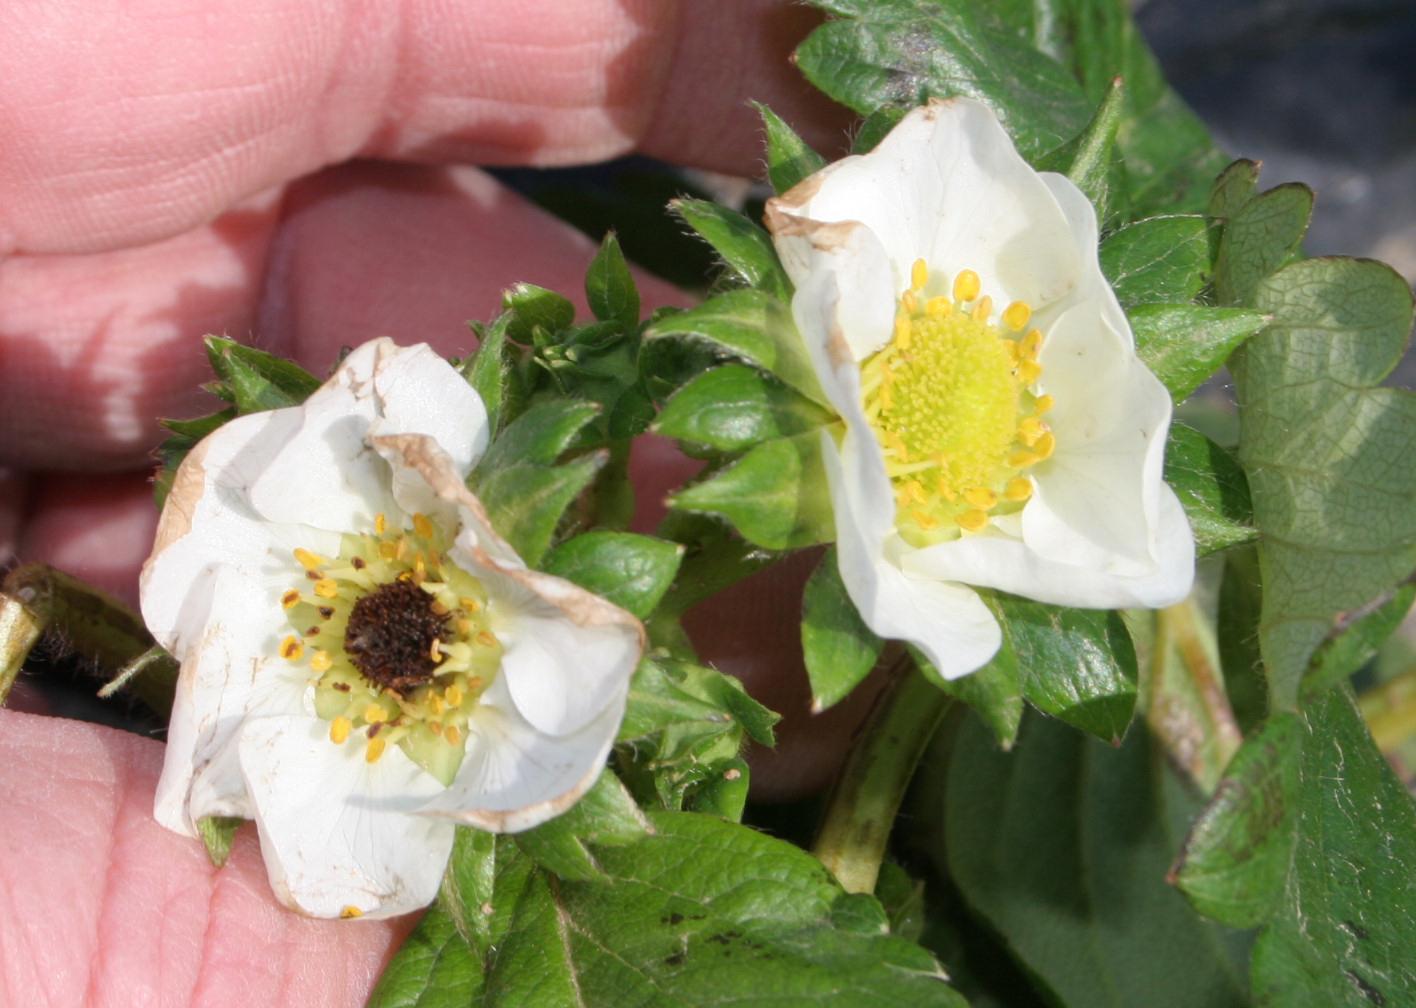 Flower with freeze injury (left) compared to uninjured flower (right) (Strang, UKY)